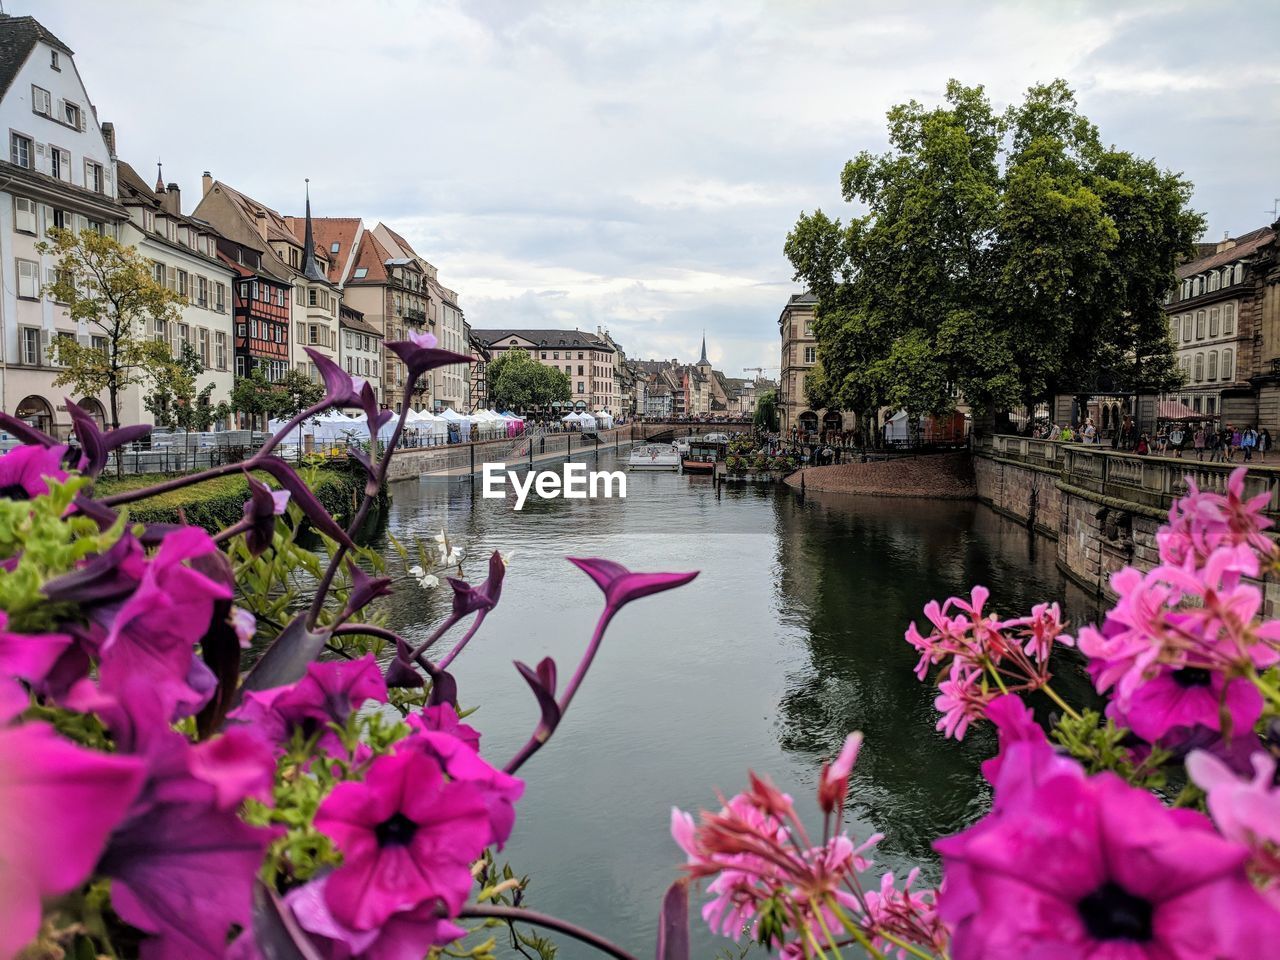 VIEW OF FLOWERING PLANTS BY RIVER